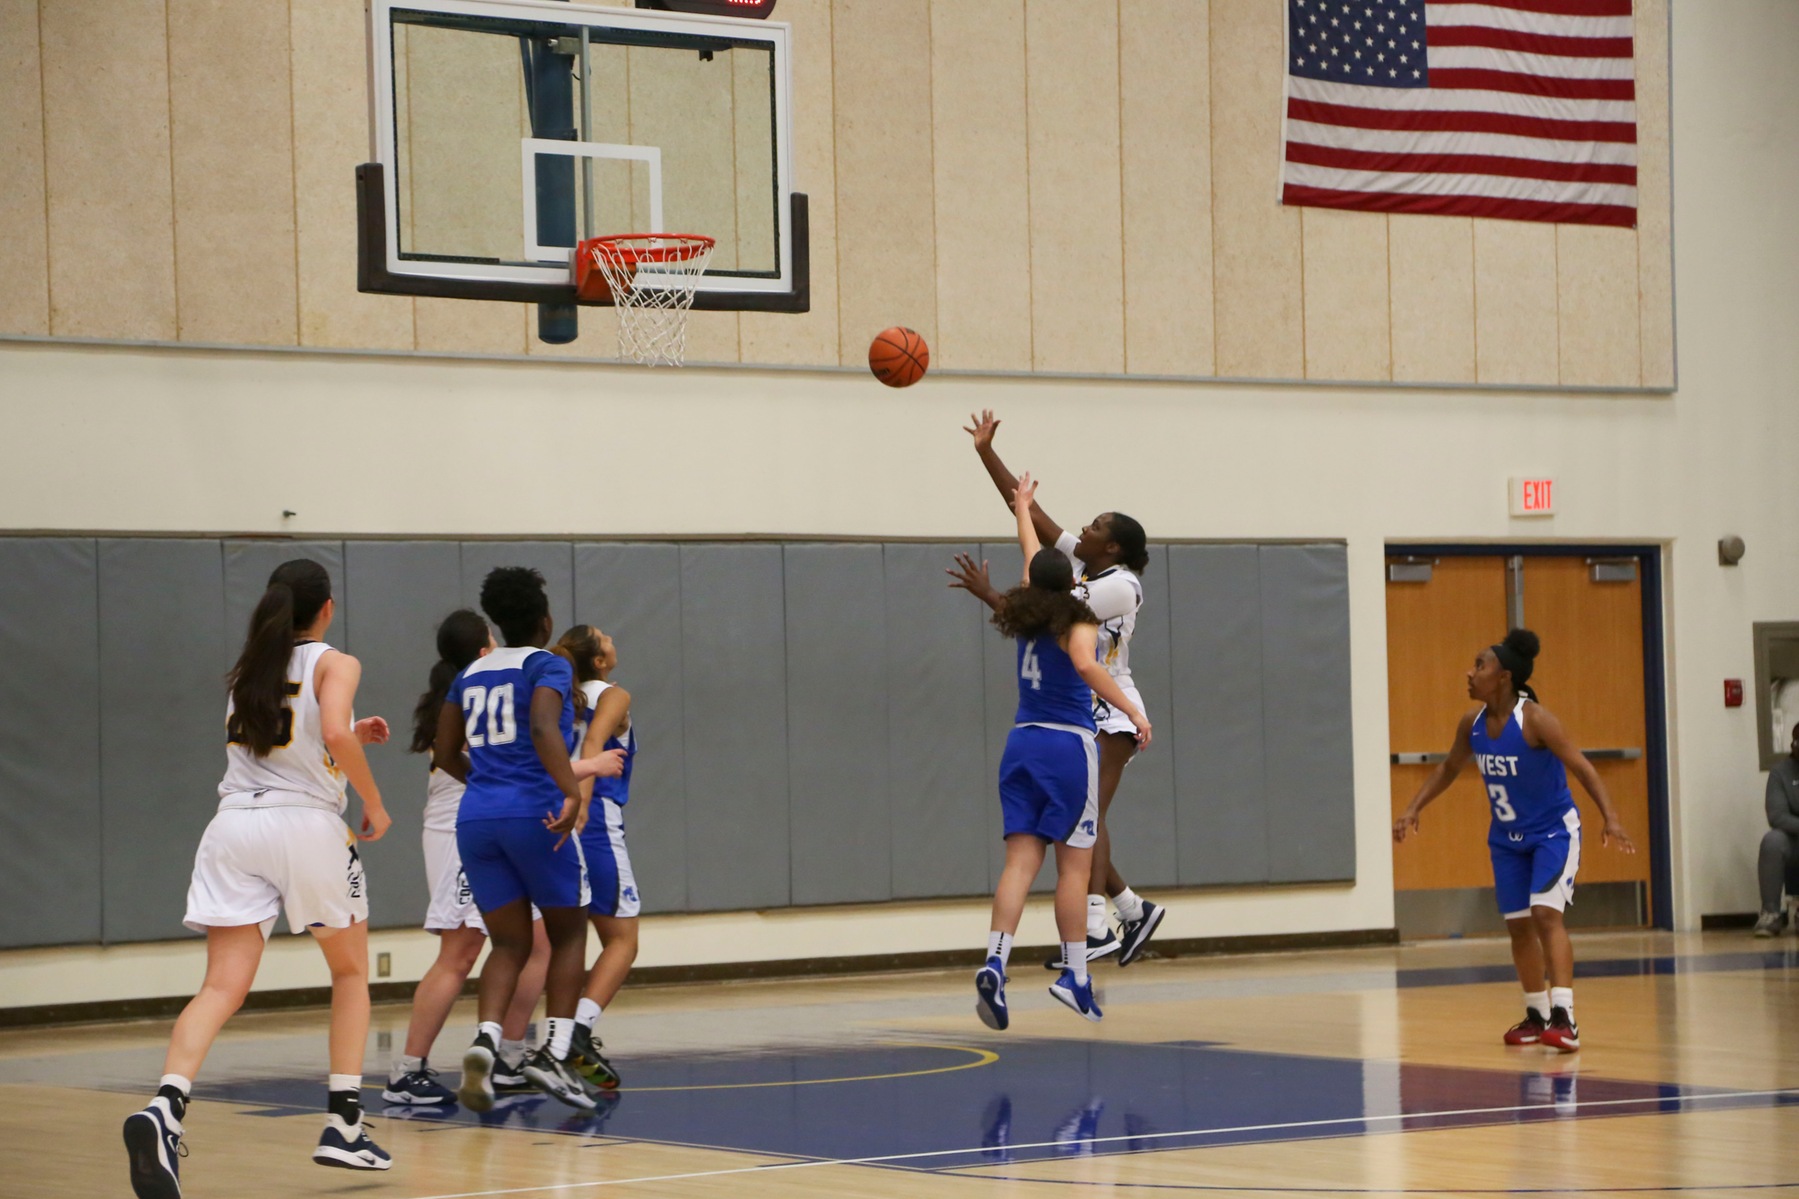 COC women's basketball vs. West L.A. College on Feb. 19, 2020 at the Cougar Cage.